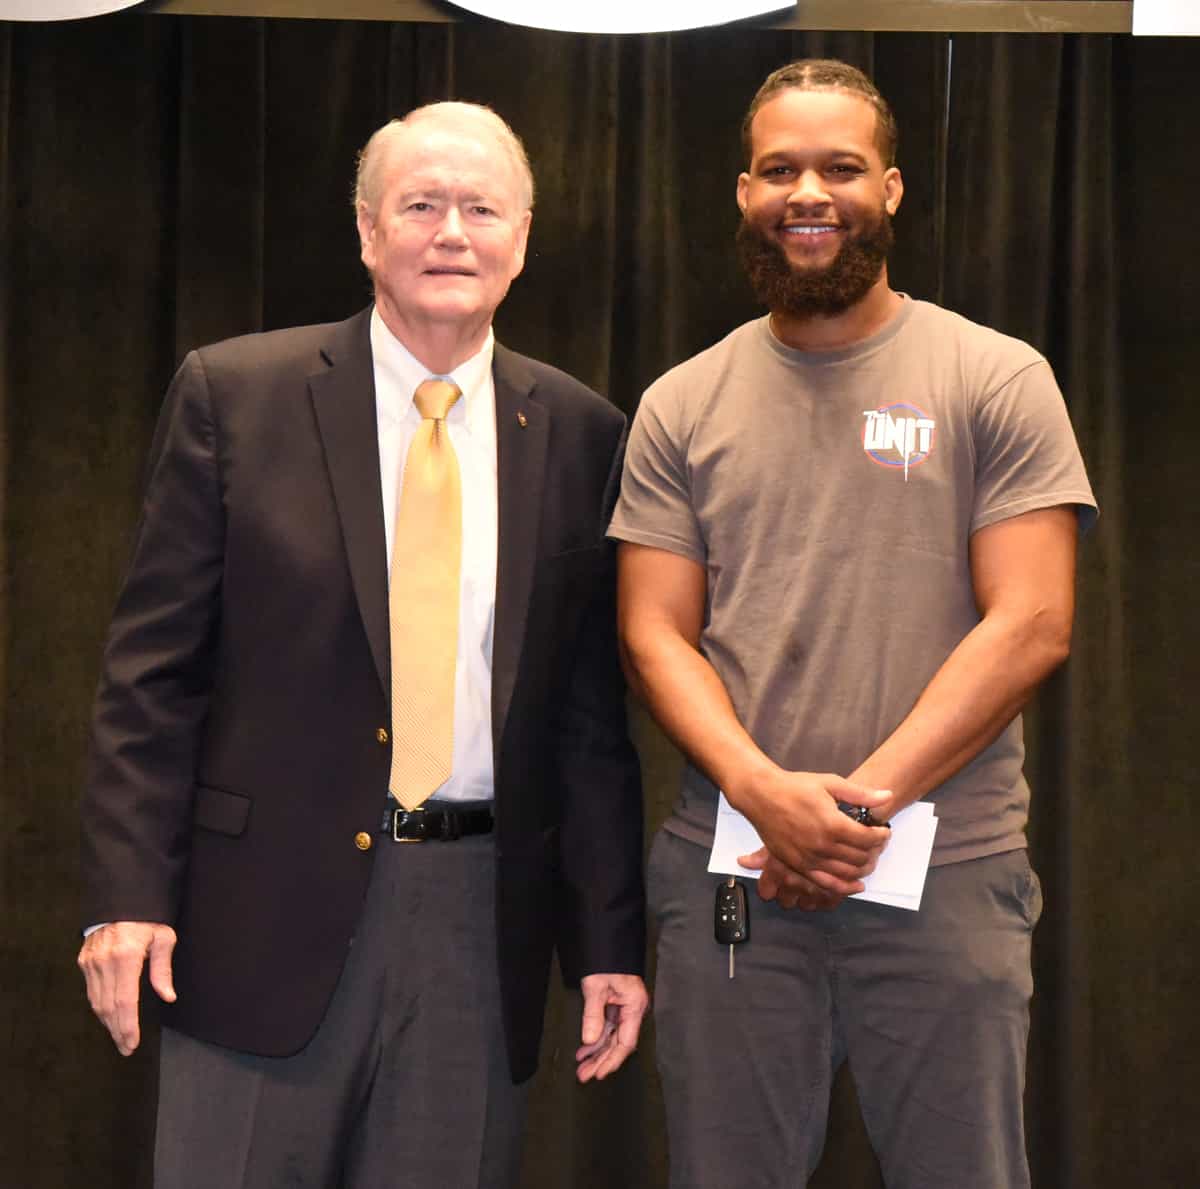 Americus Rotary Club member and Past President Don Smith (l) is shown above presenting a check from the Rotary Club to Tredarrian Colbert (r), who was selected as the SGTC 2023 GOAL student of the year.